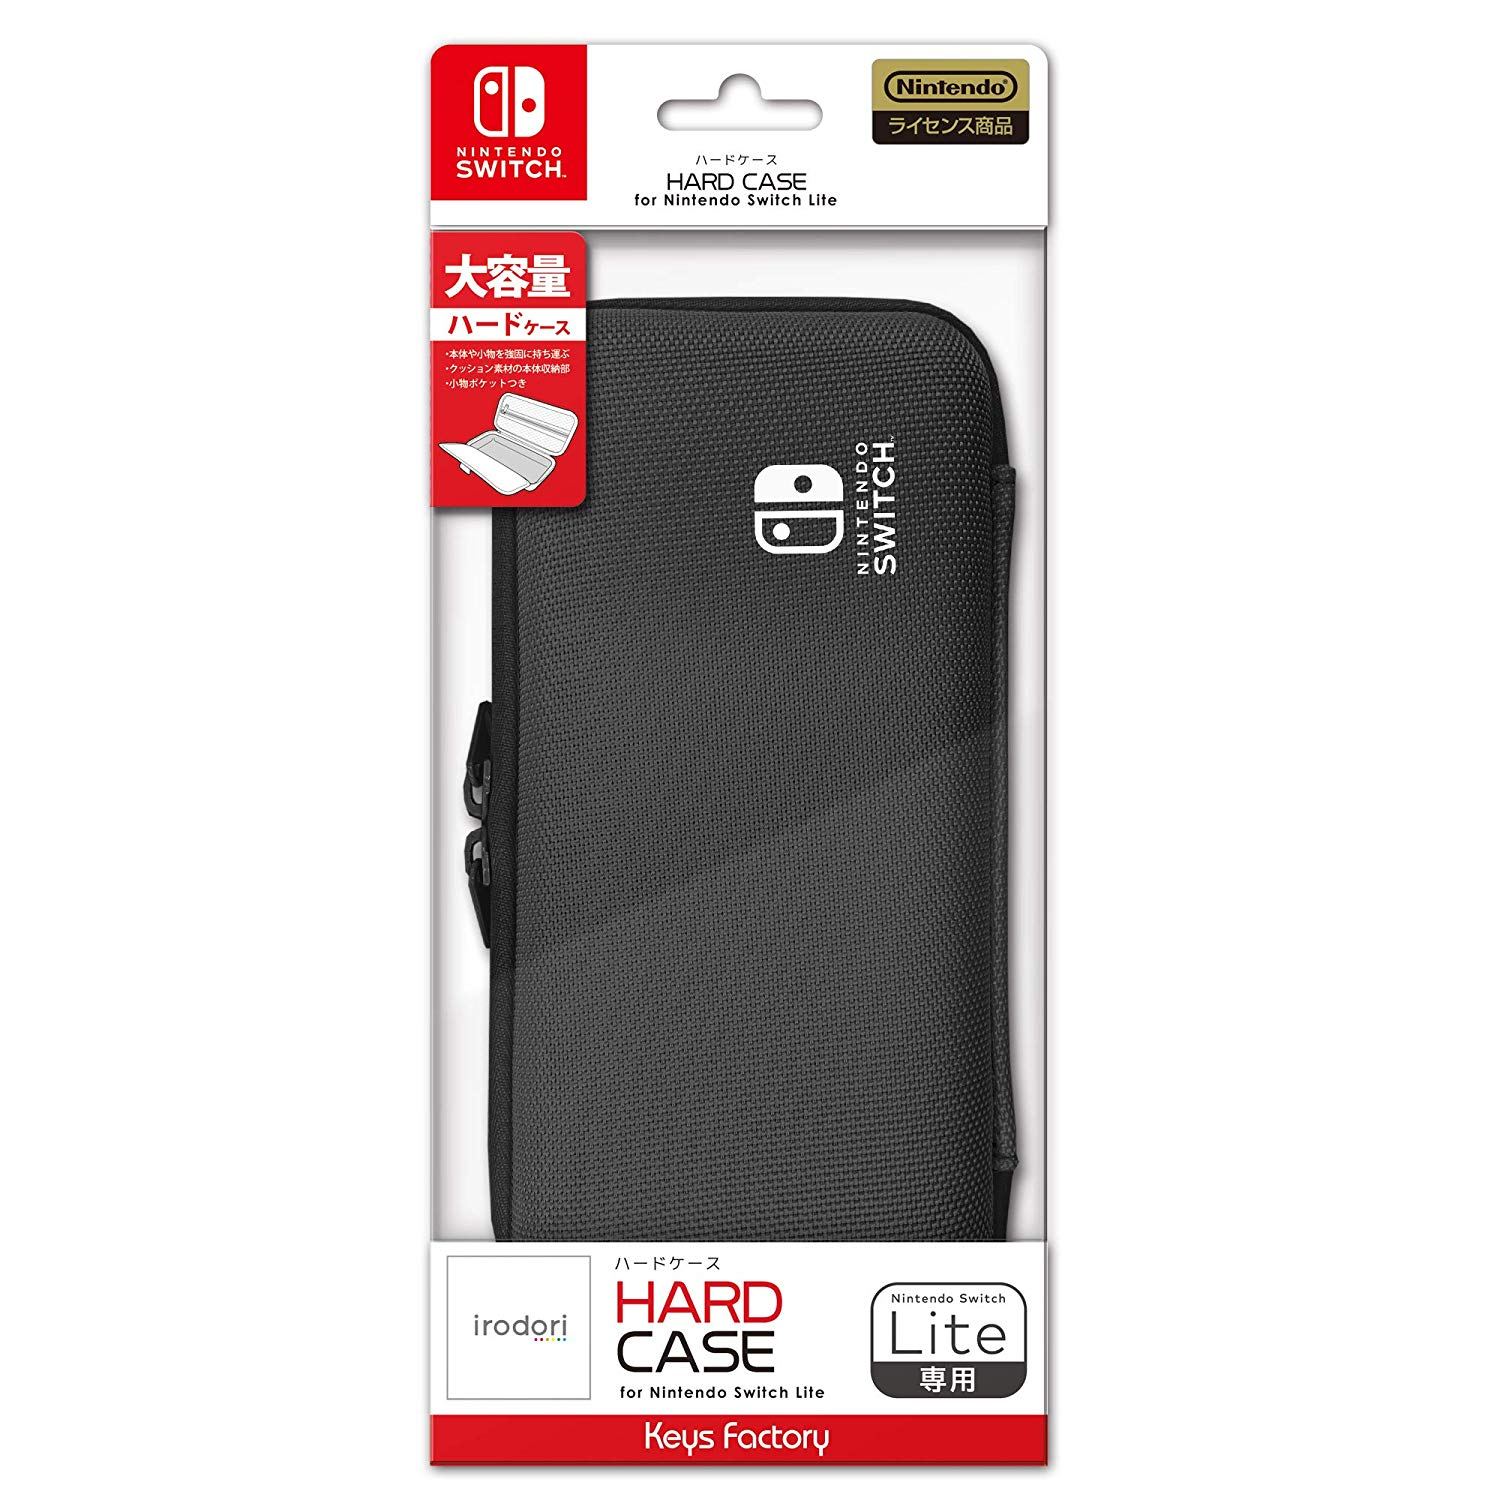 Hard Case for Nintendo Switch Lite (Charcoal Gray) for Nintendo Switch